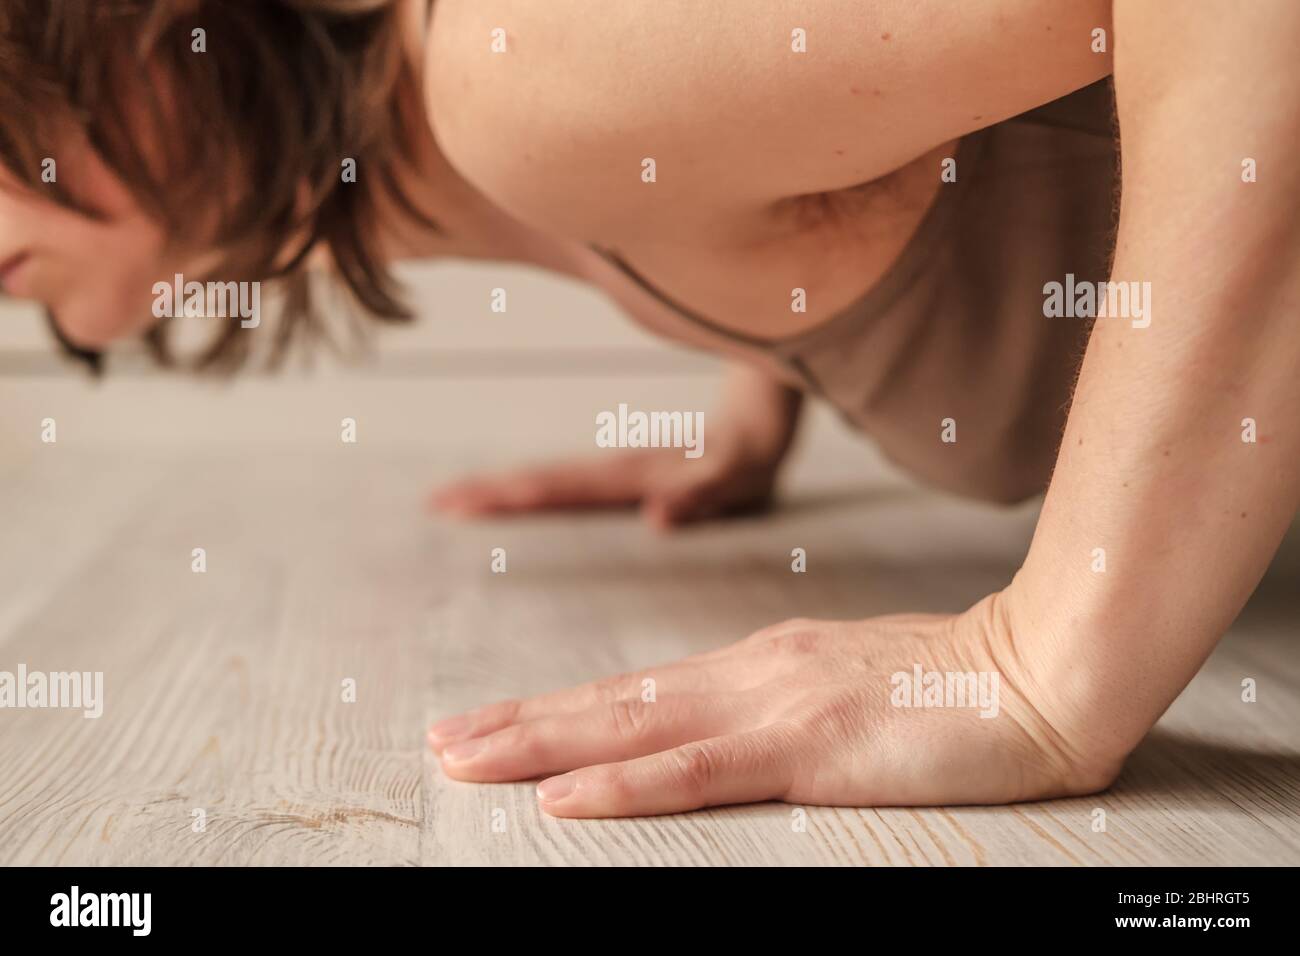 Woman doing push-ups exercise on hands or practicing yoga at home. Close-up of hands. Body positive trend. Stock Photo